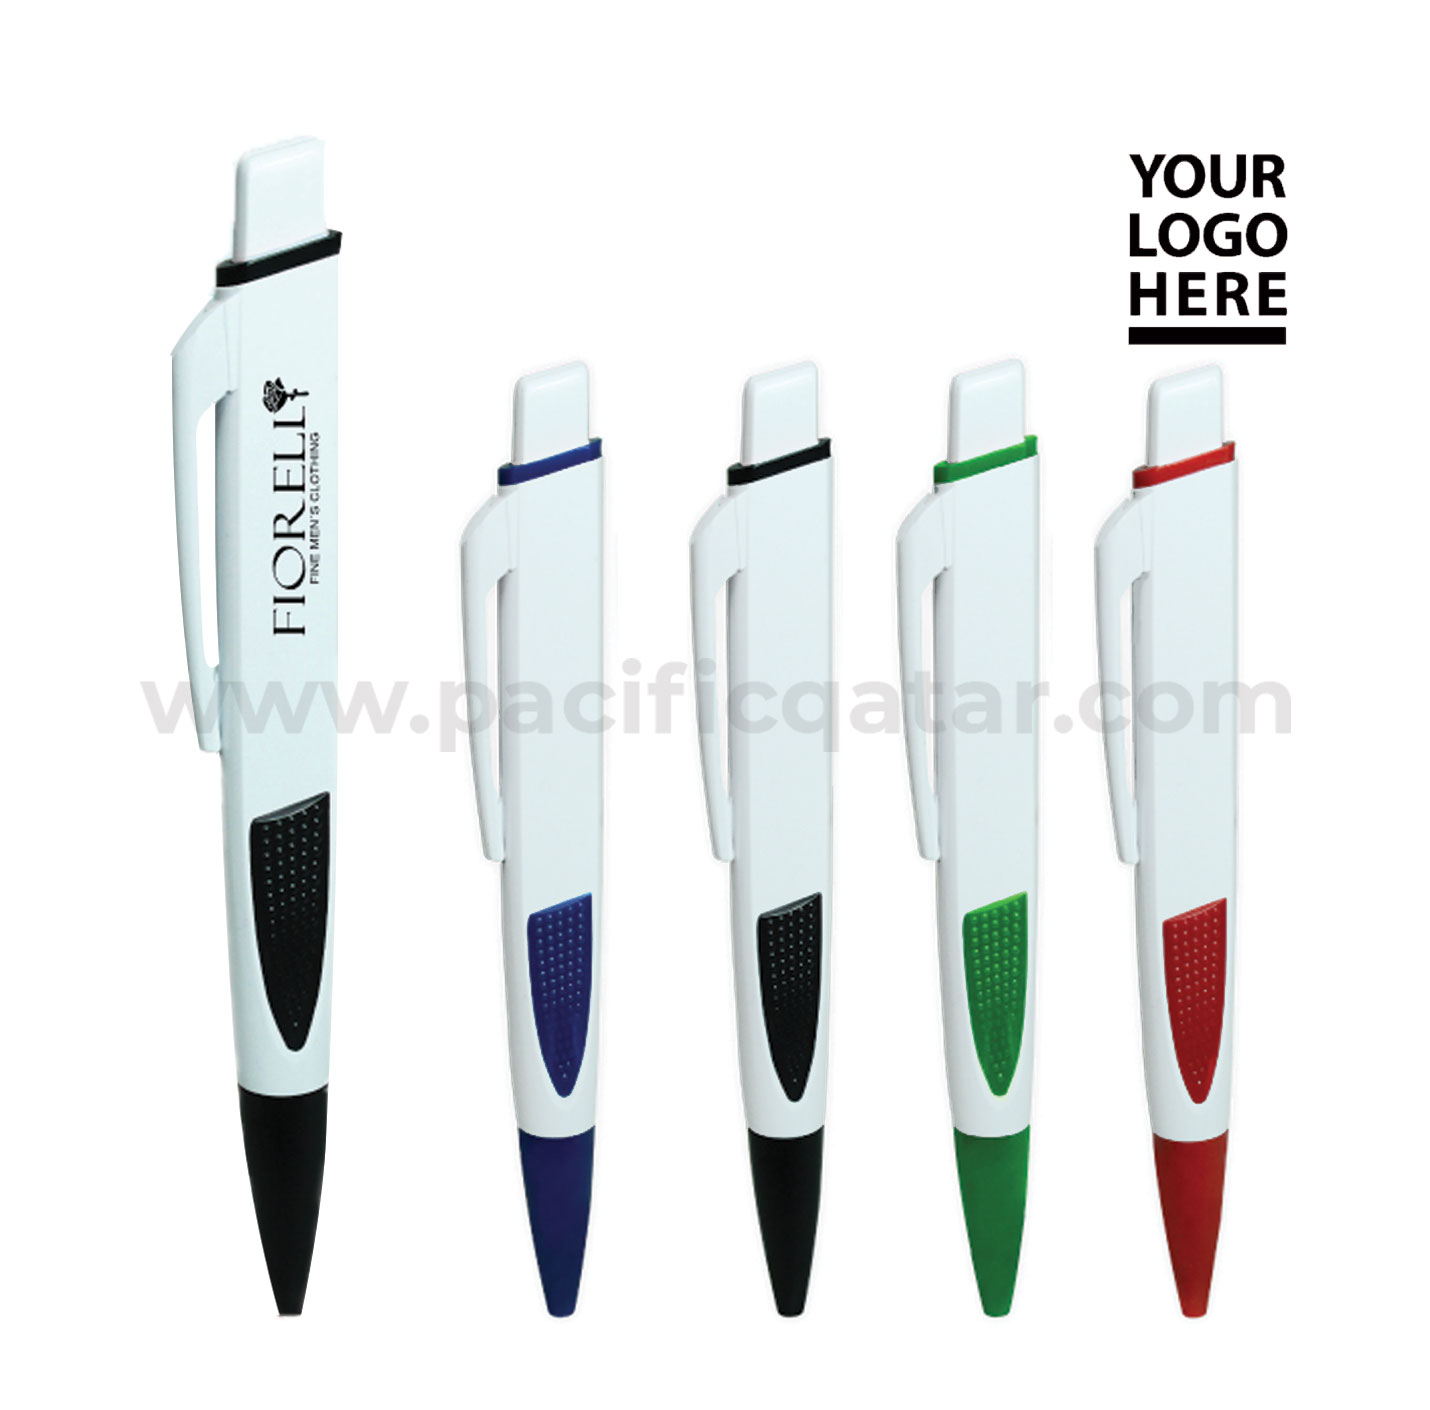 Flat Solid White Body Plastic pen with logo